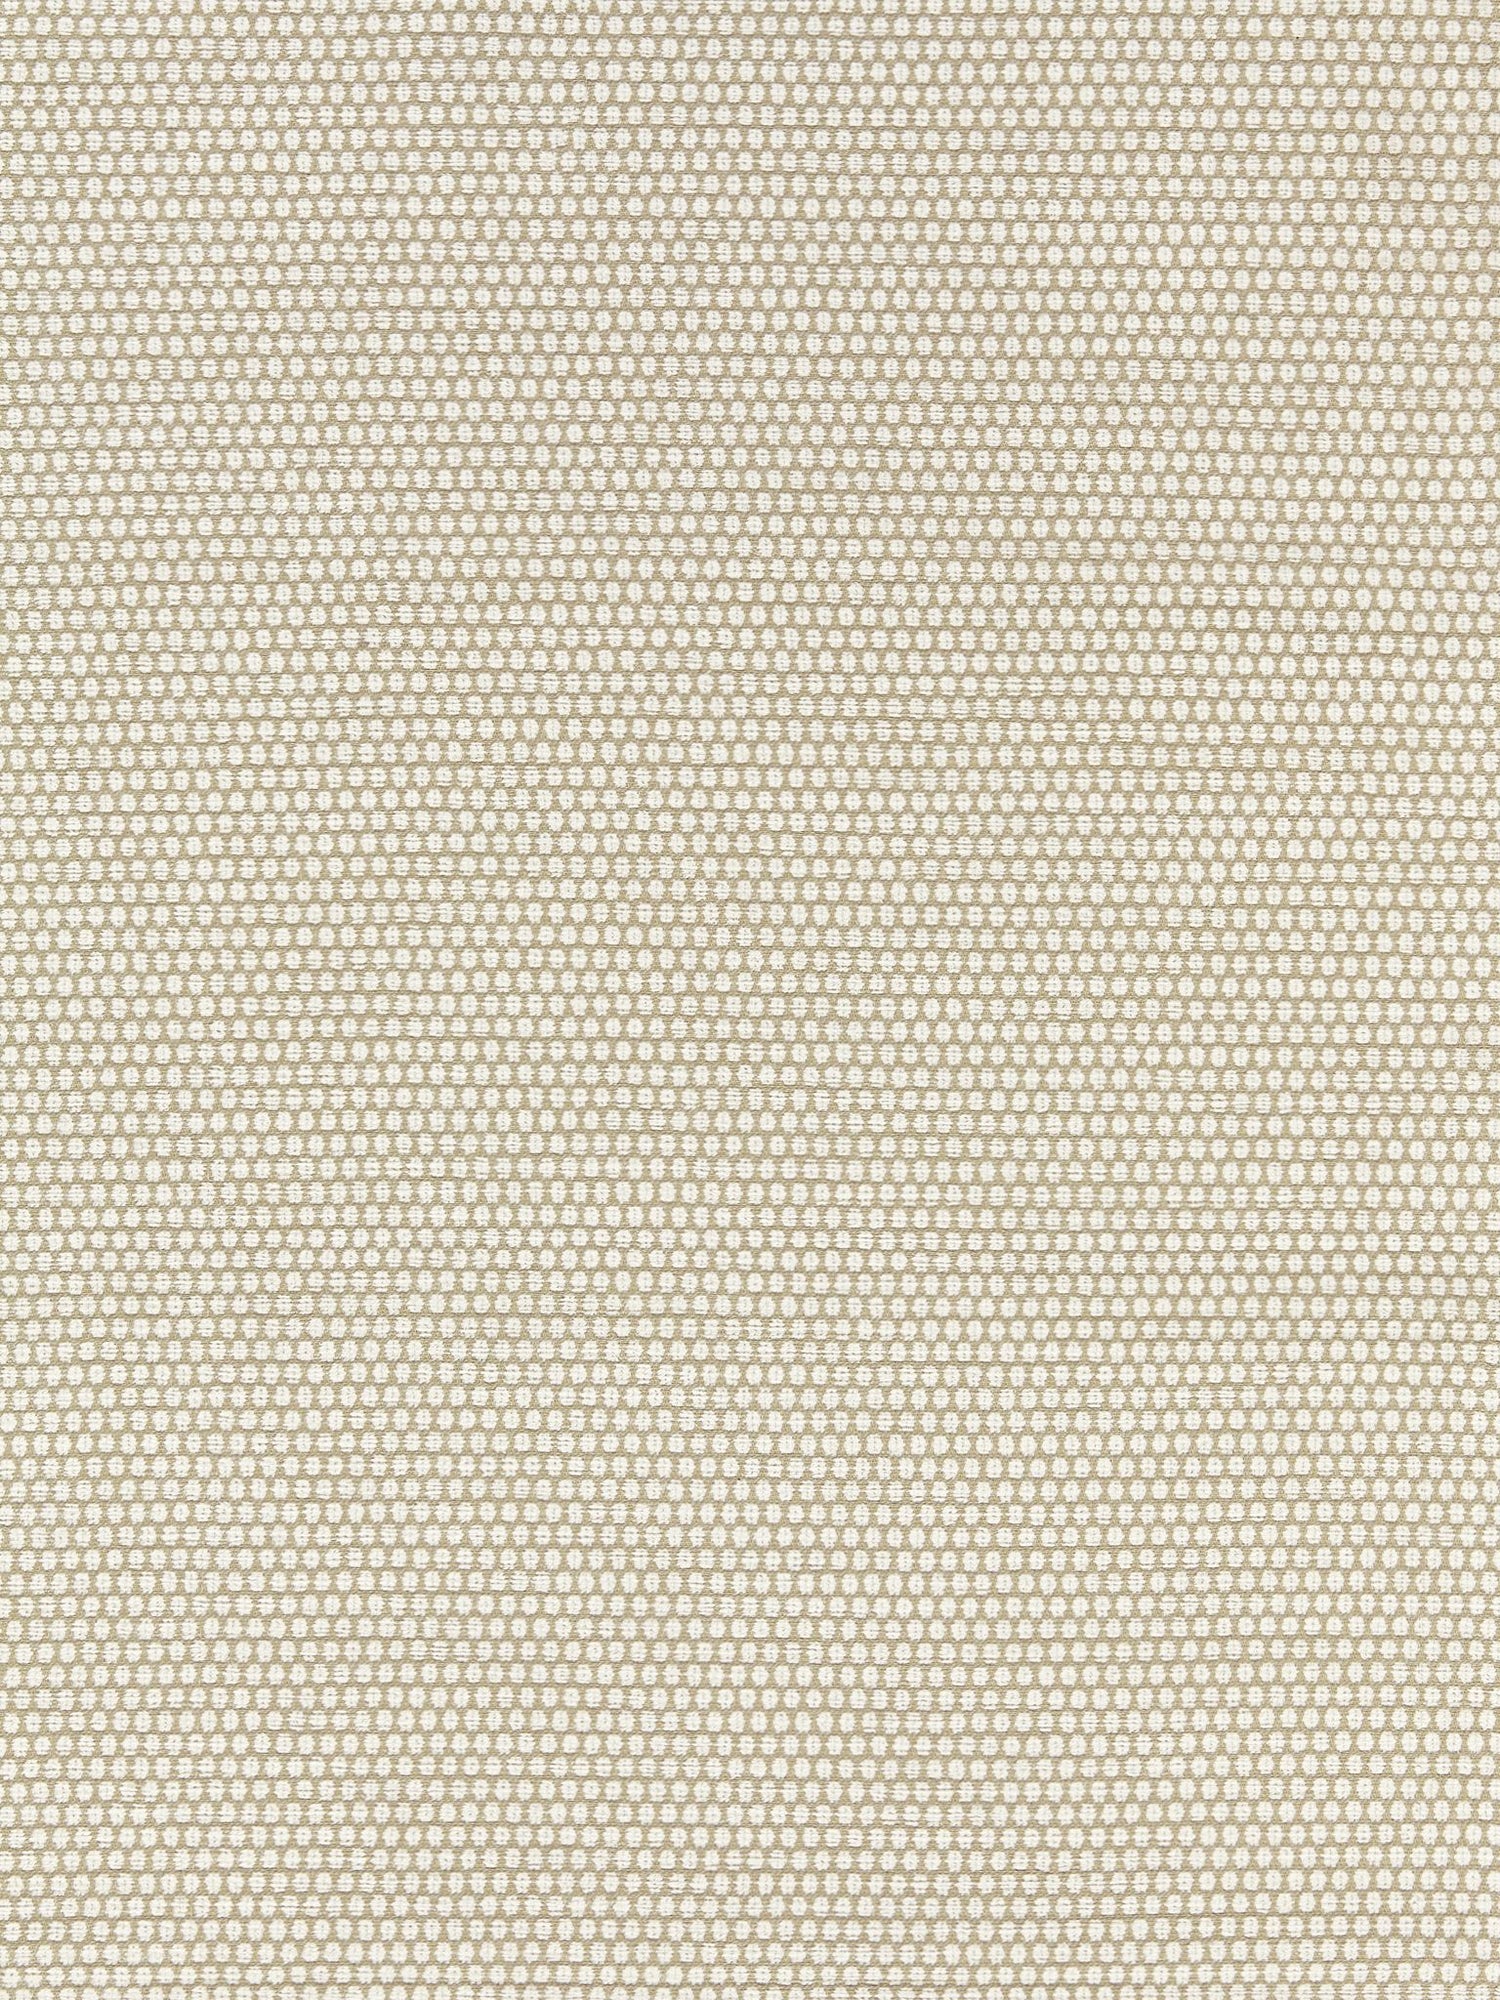 Corsica Weave fabric in sand color - pattern number SC 000127190 - by Scalamandre in the Scalamandre Fabrics Book 1 collection